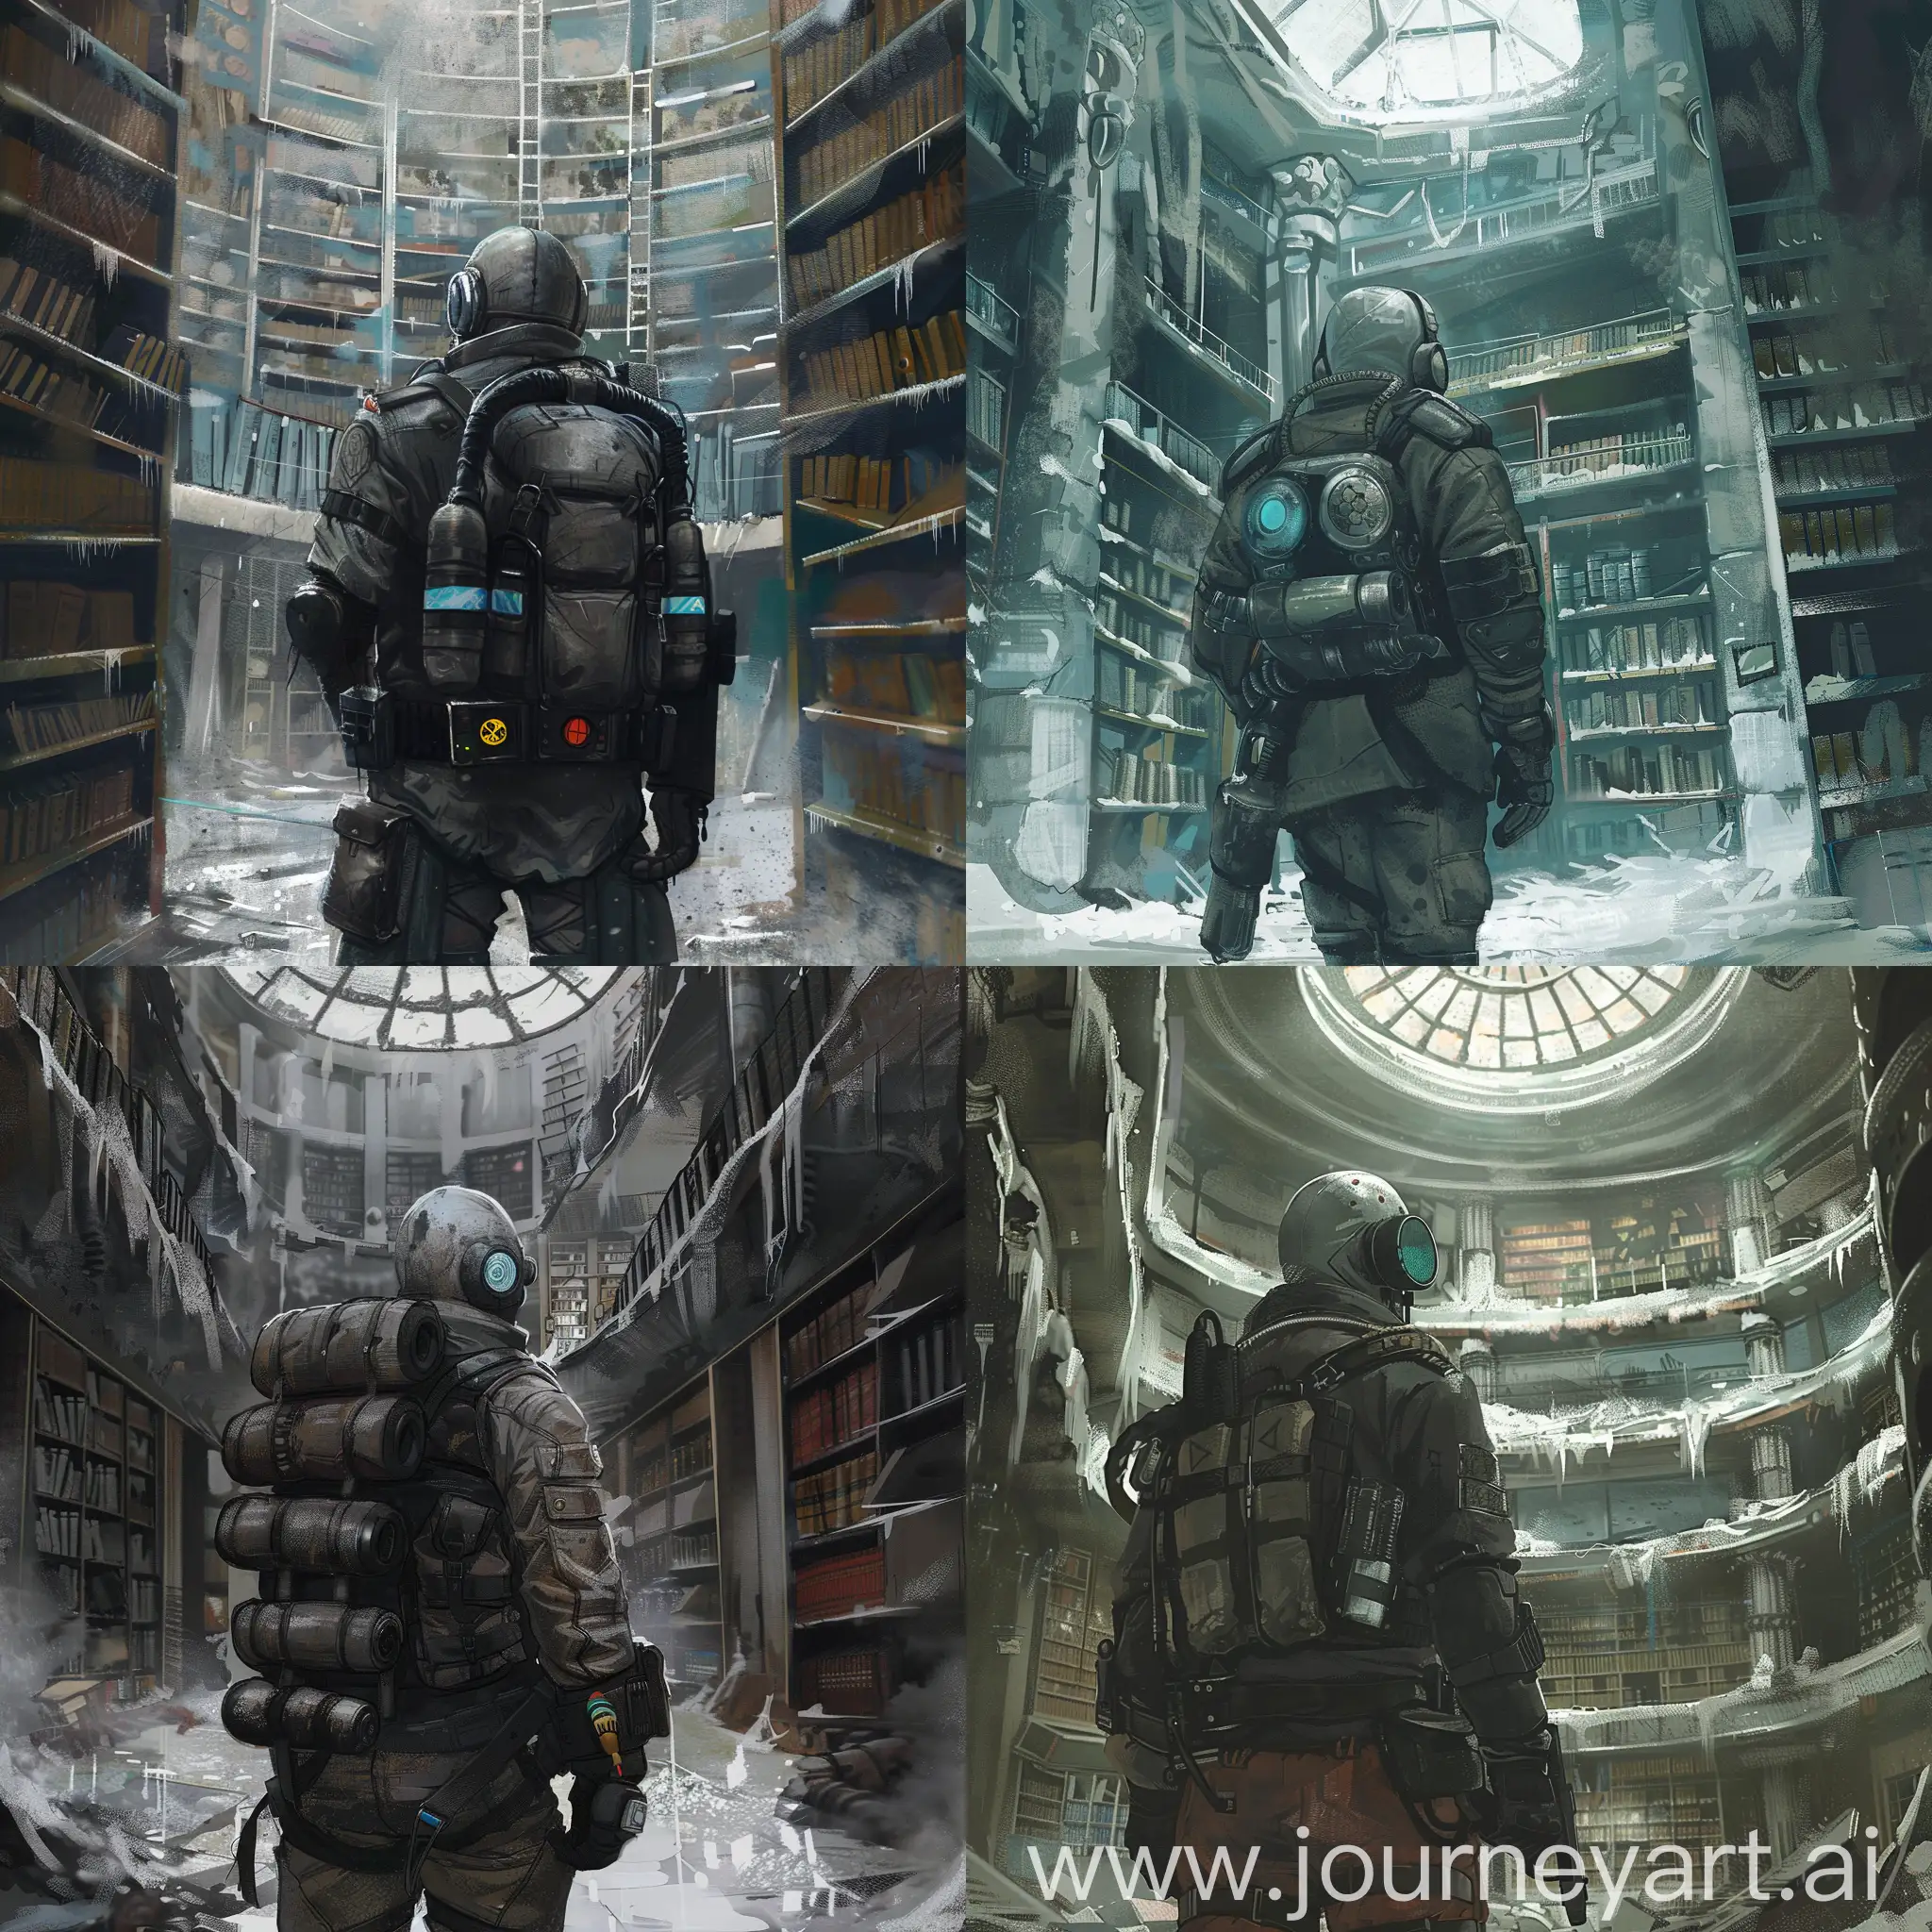 Make art of a survivor in the world of the post-apocalypse Metro 2033, a stalker stands inside a large destroyed Lenin library in a destroyed and radioactive winter Moscow, almost all shelves are destroyed or rotted.